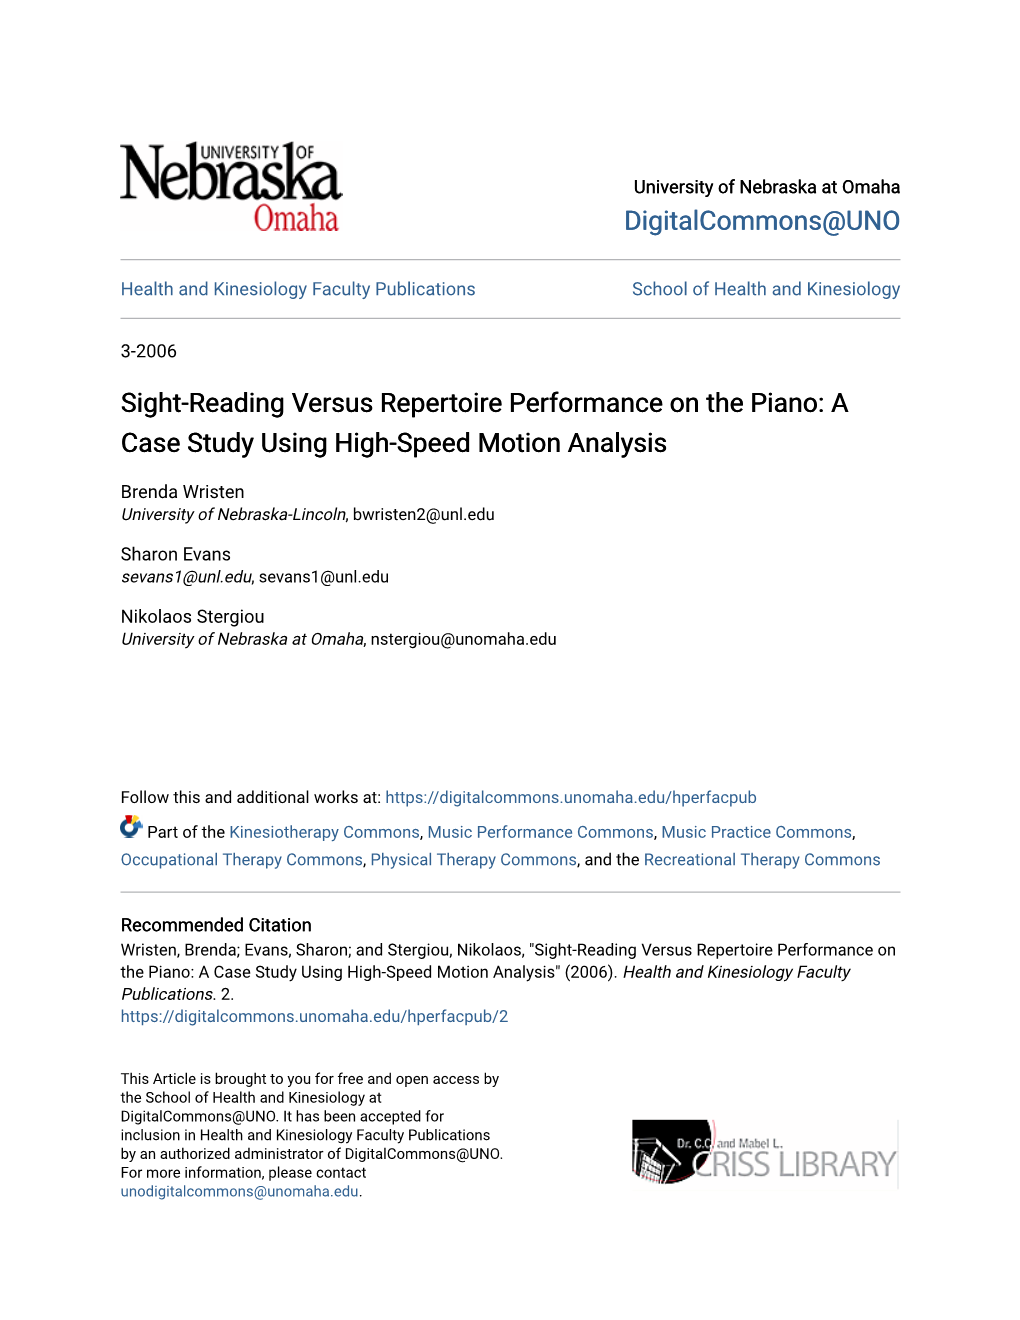 Sight-Reading Versus Repertoire Performance on the Piano: a Case Study Using High-Speed Motion Analysis